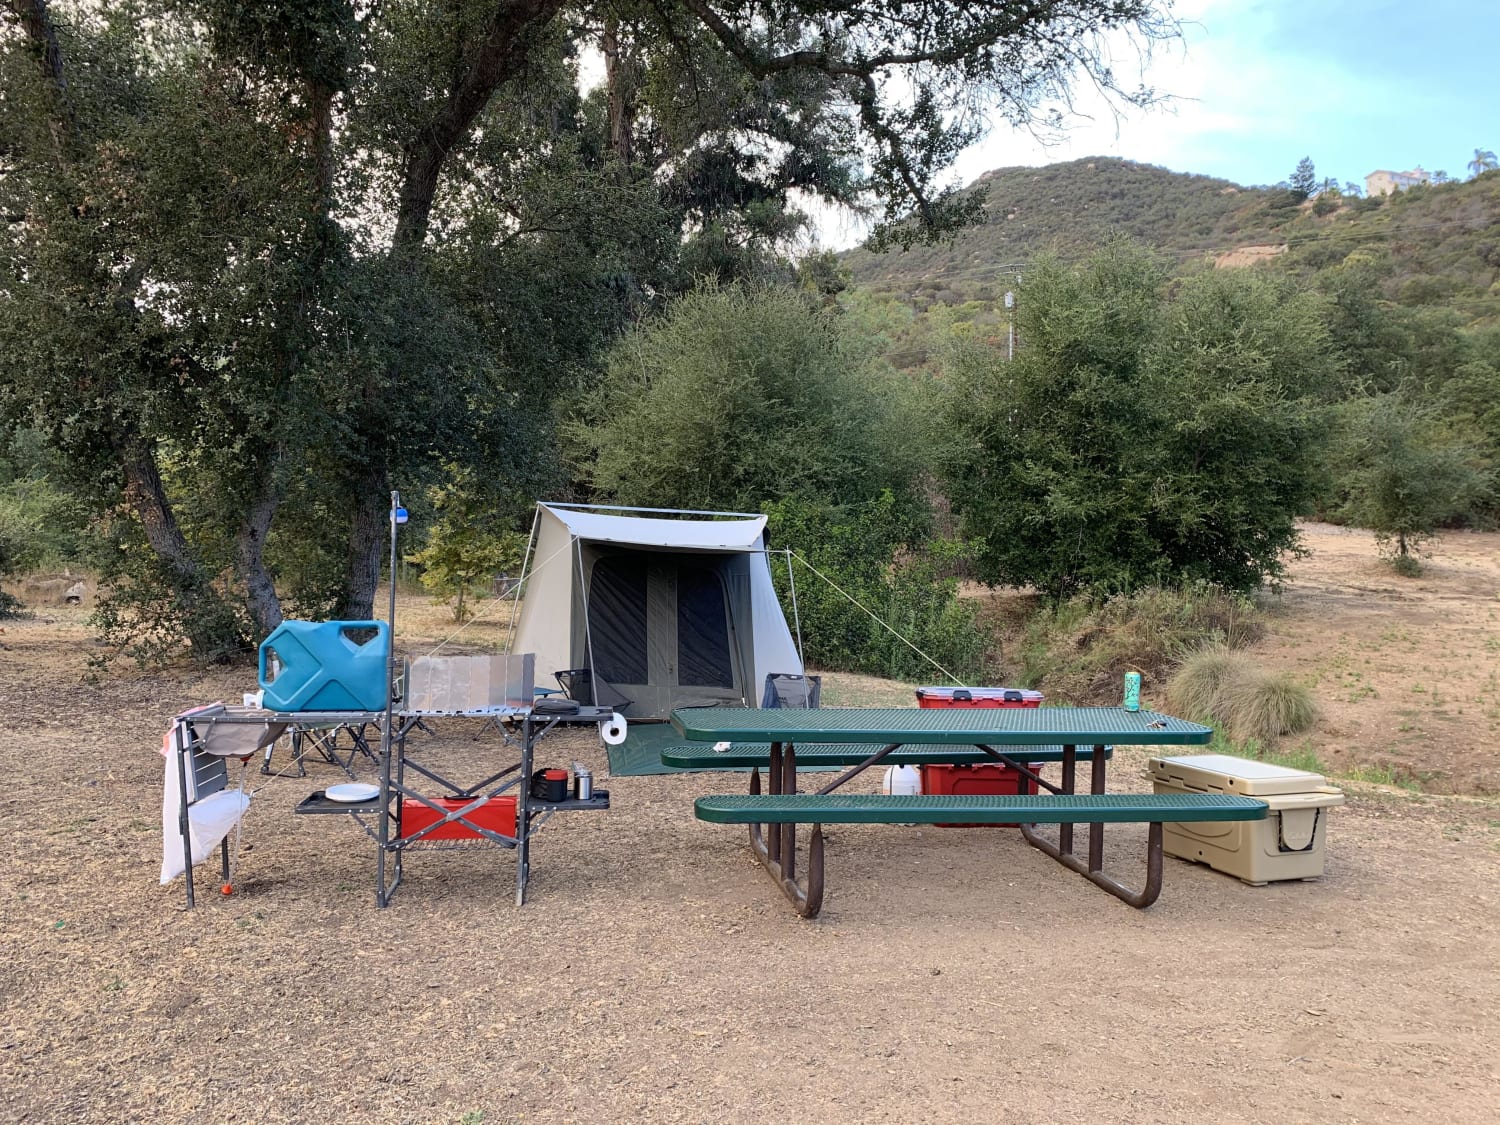 First time camping in Dos Picos, CA. Quite a relaxing adventure.